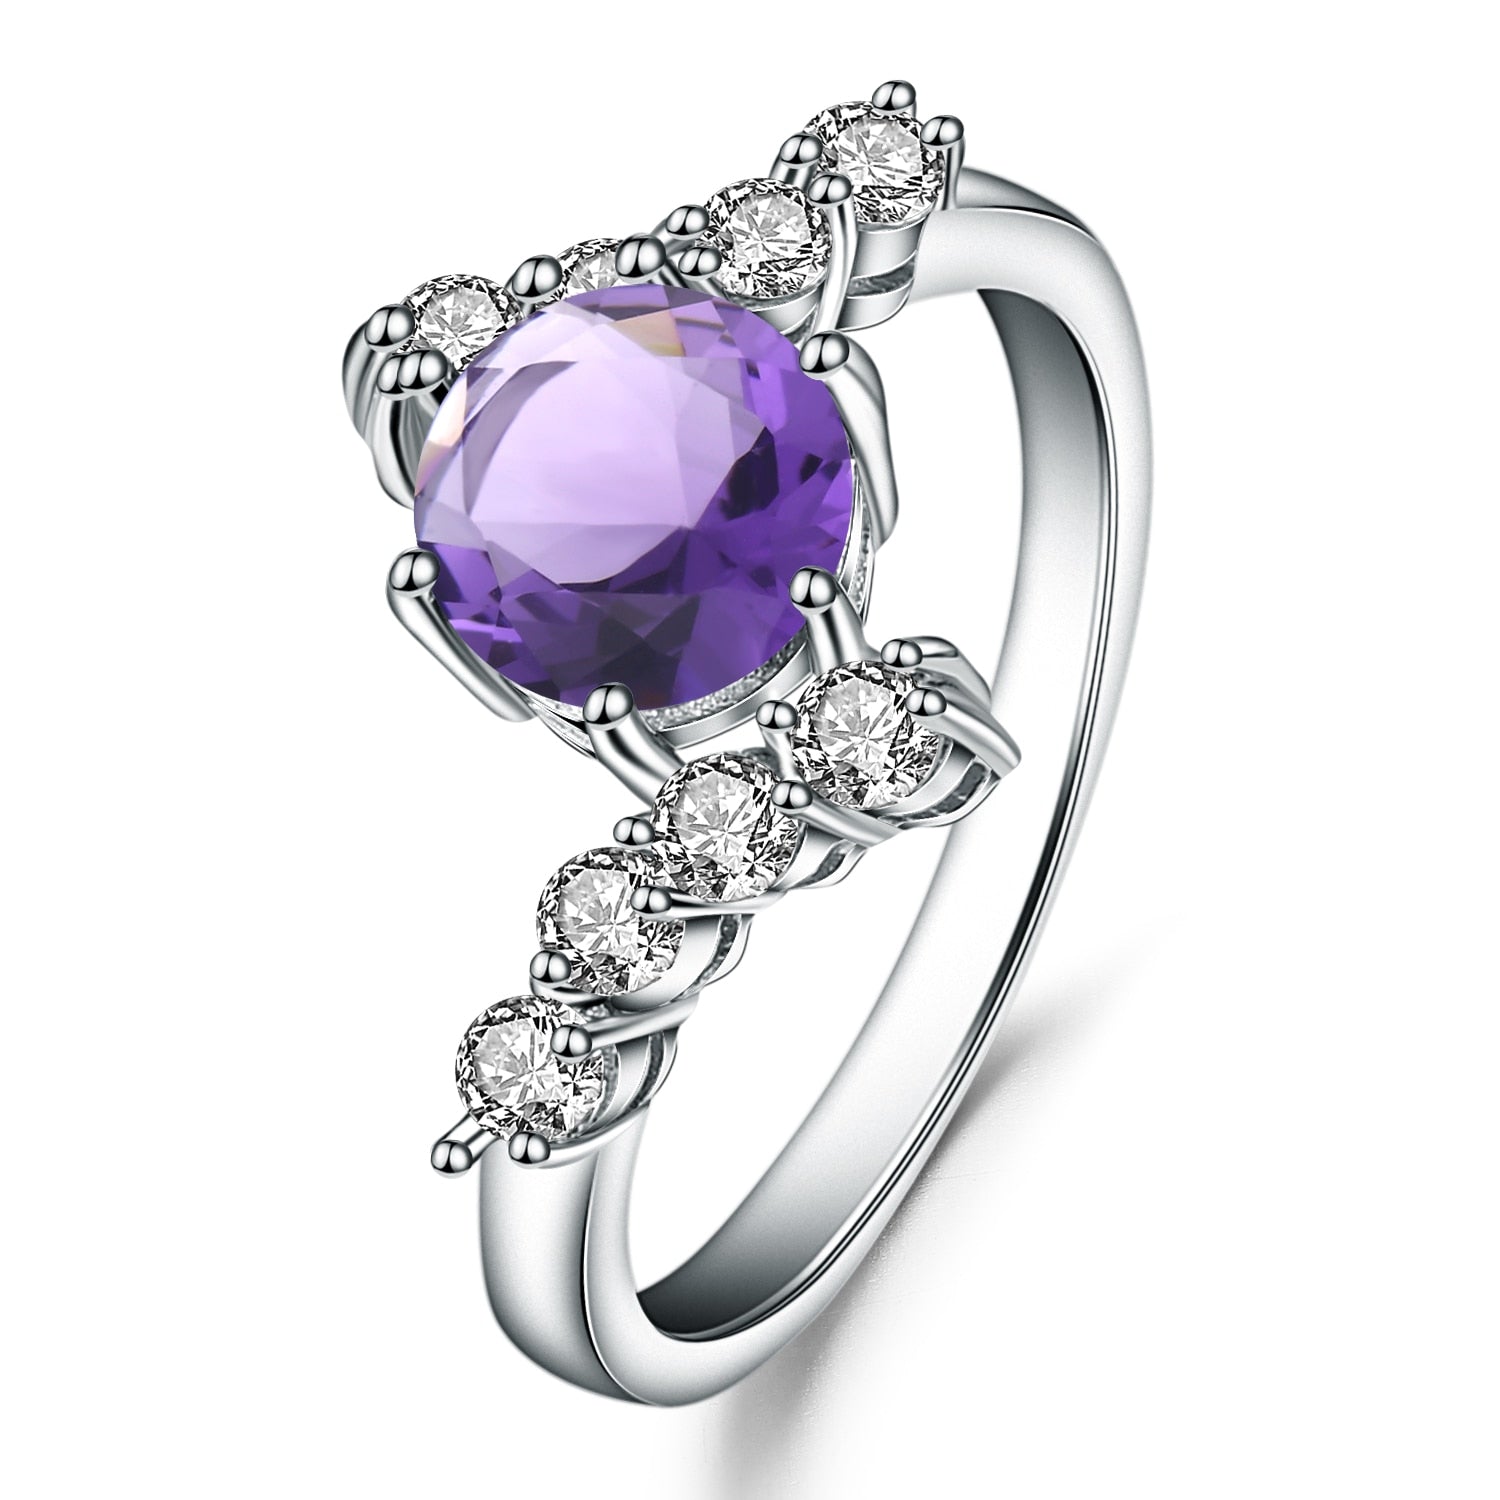 GEM&#39;S BALLET 100% 925 Sterling Silver Engagement Rings 1.35Ct Round Natural Amethyst Gemstone Ring for Women Fine Jewelry Amethyst|925 Sterling Silver